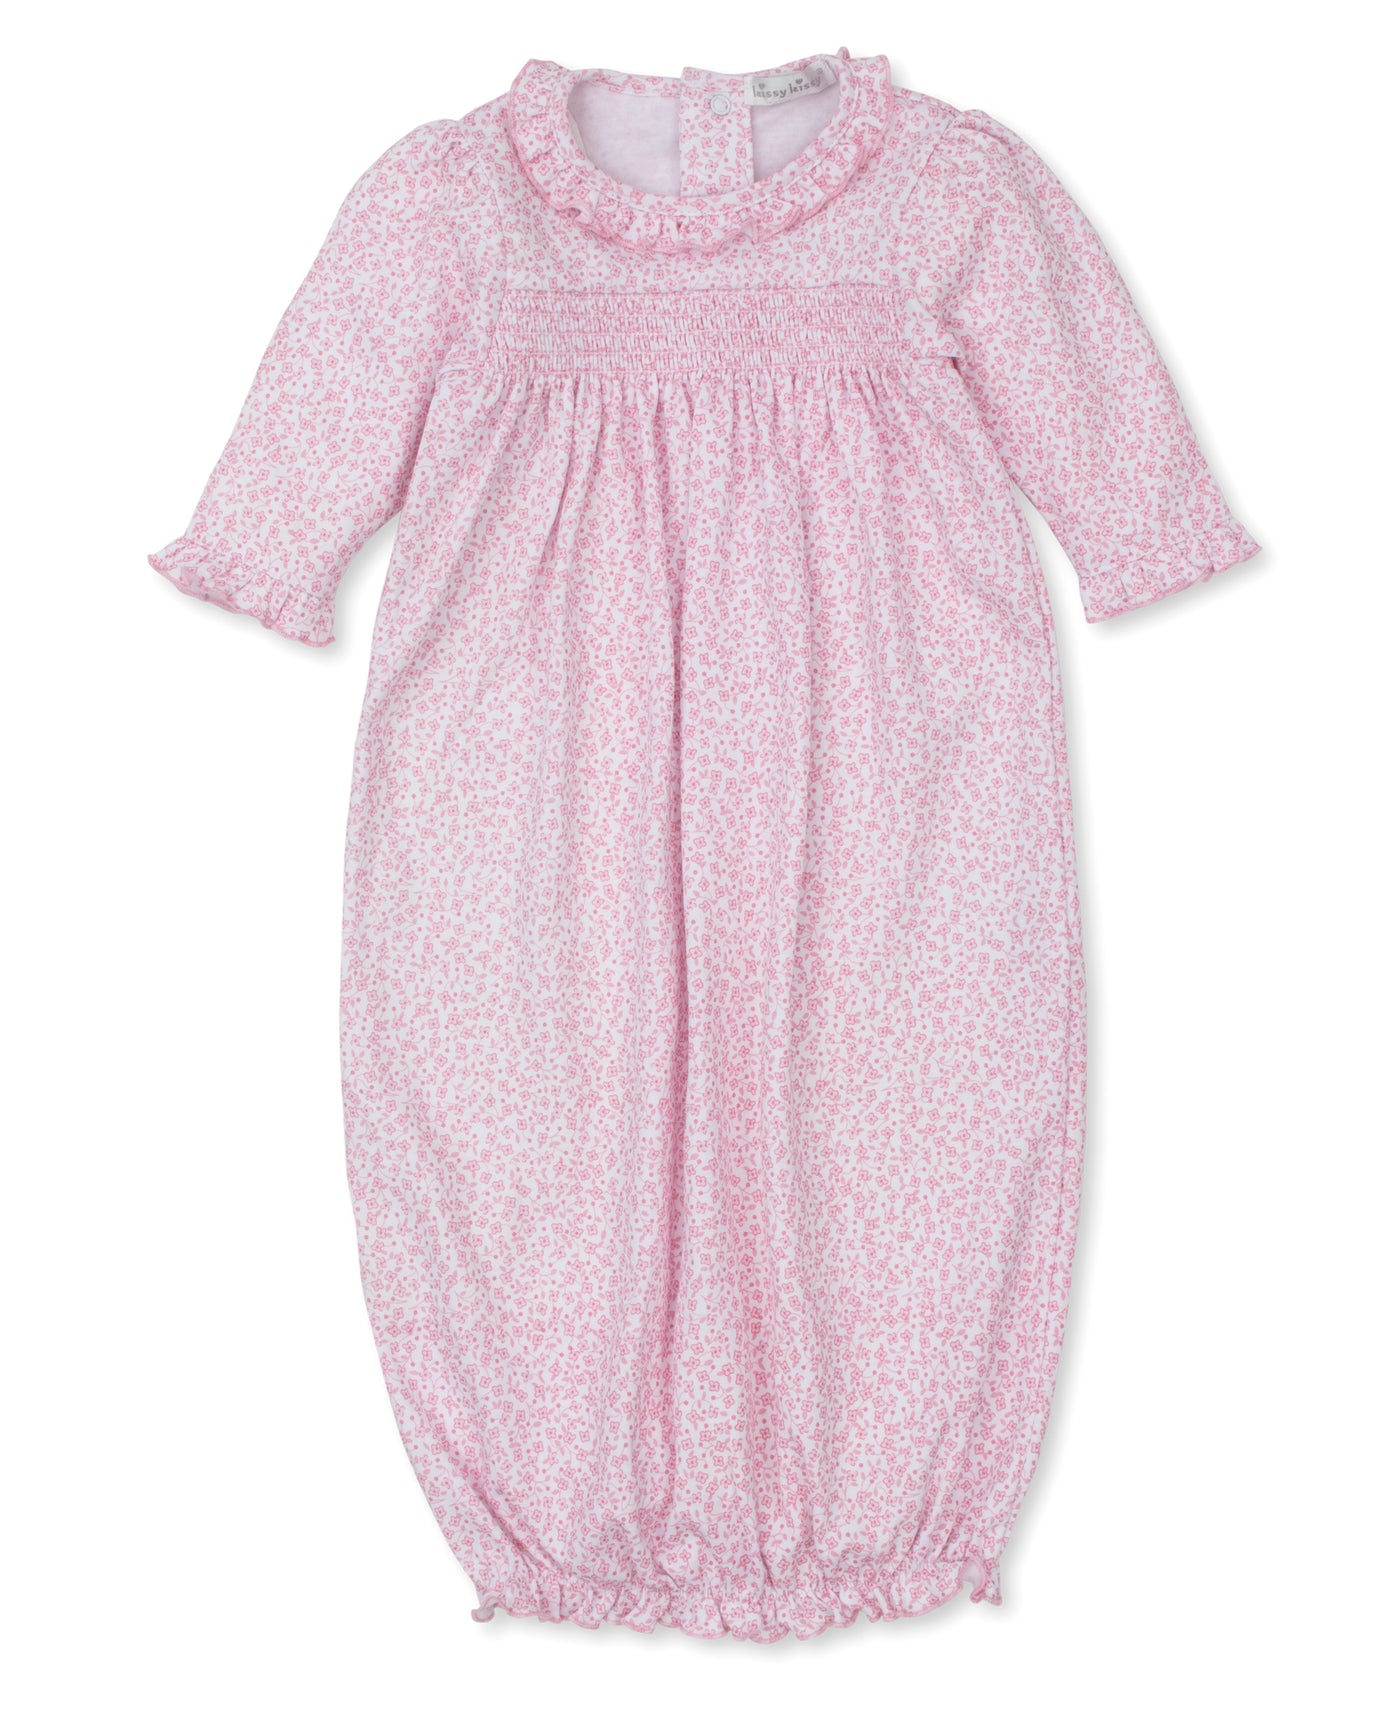 Sack Gown - Petite Blooms Pink